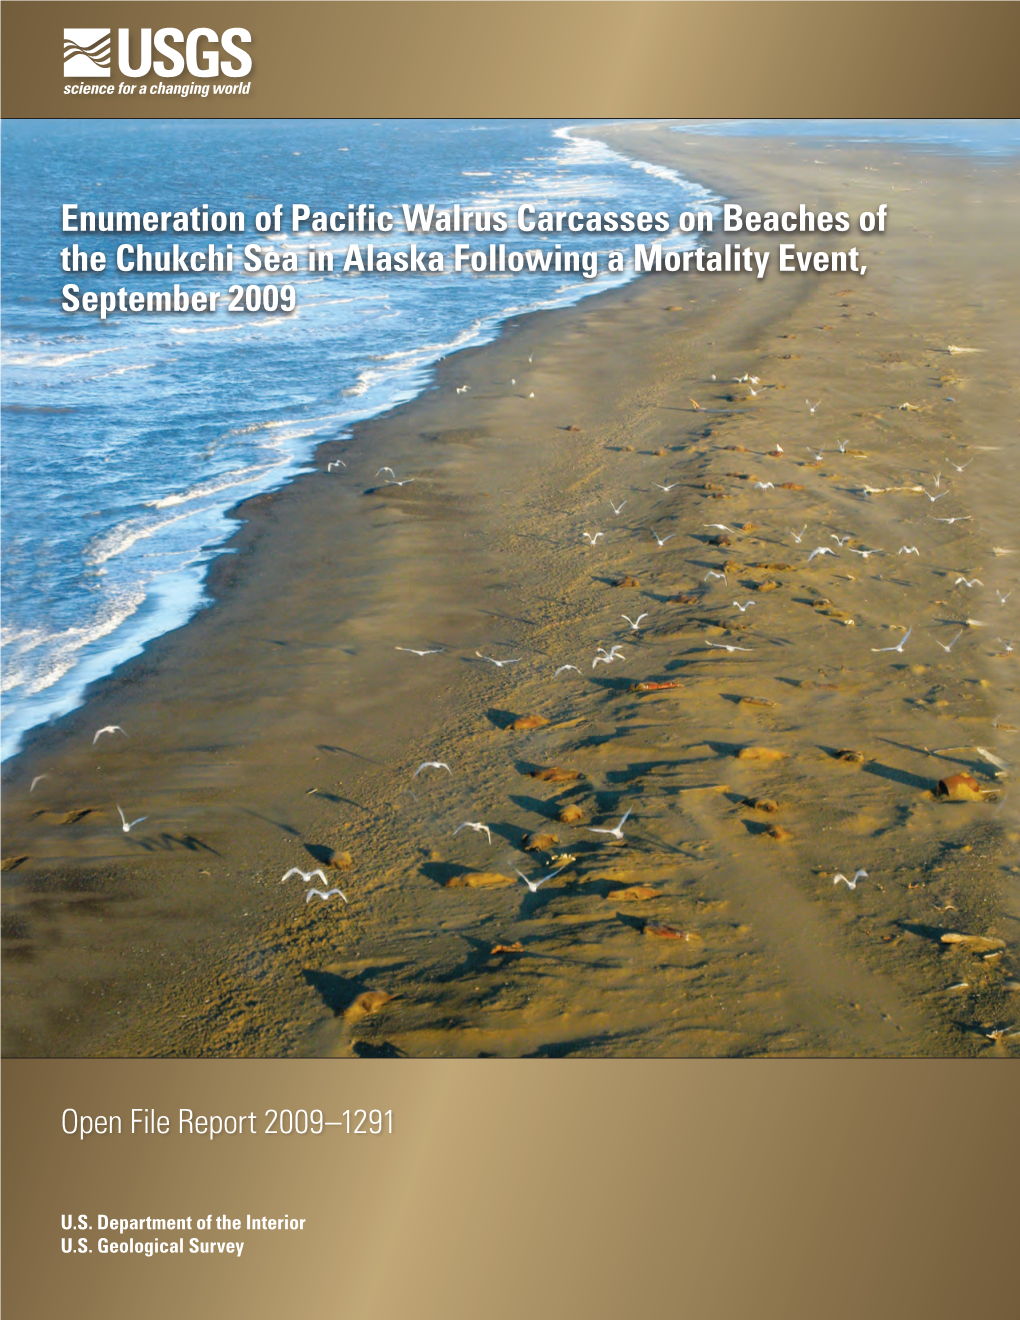 Enumeration of Pacific Walrus Carcasses on Beaches of the Chukchi Sea in Alaska Following a Mortality Event, September 2009